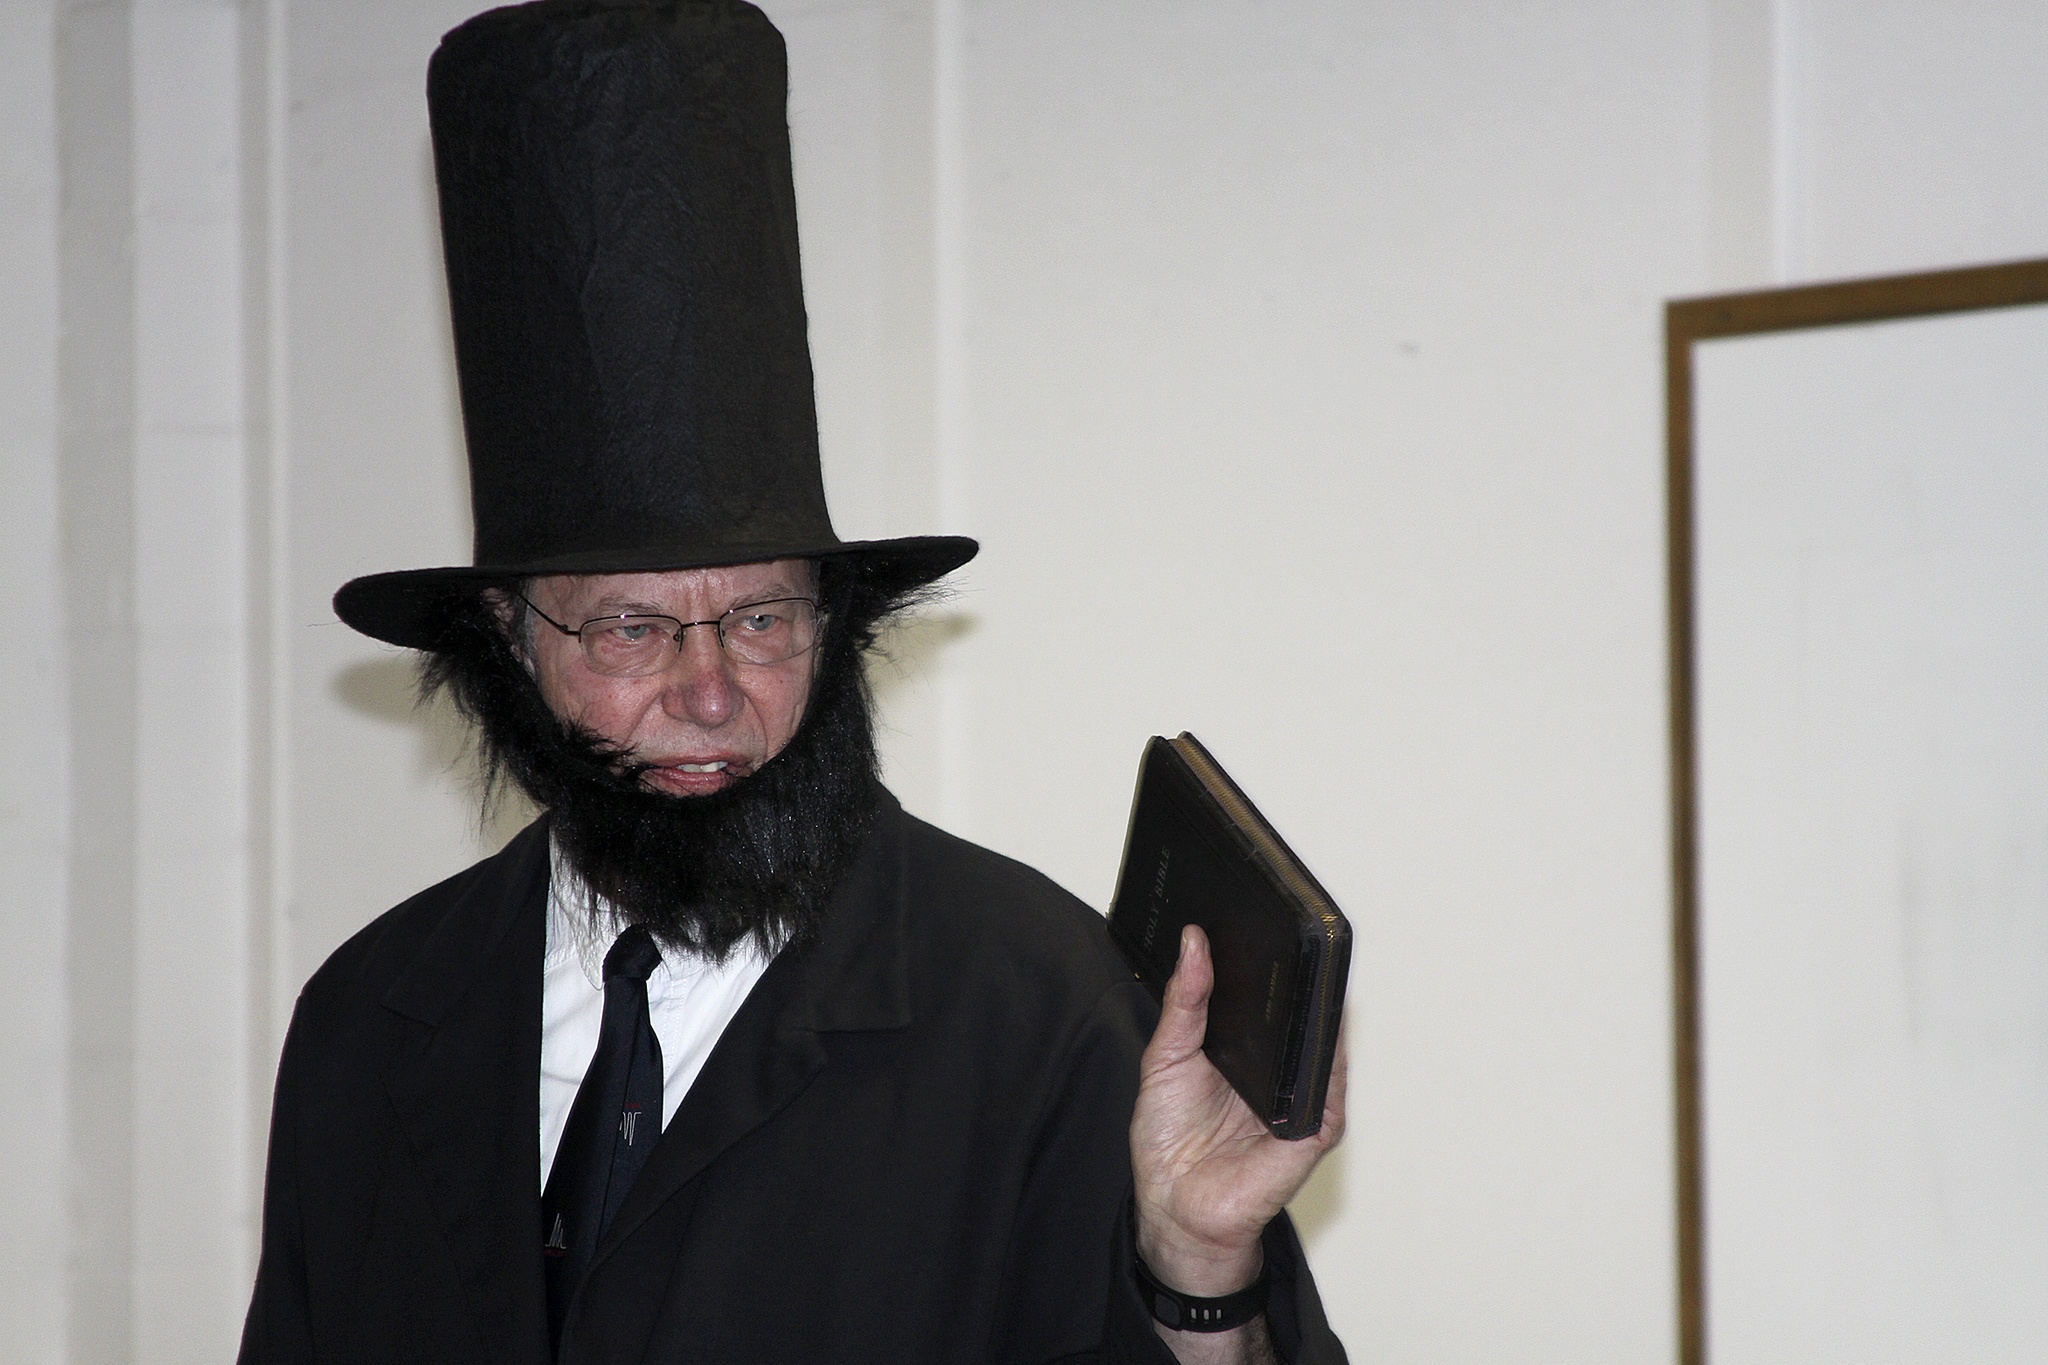 Alan Schell of Oak Harbor dresses up as Abraham Lincoln and impersonates the former U.S. president in the spirit of President’s Day Wednesday, Feb. 15, 2017 at Oak Harbor Christian School. Children from kindergarten through sixth grade attended. Photo by Ron Newberry/Whidbey News-Times